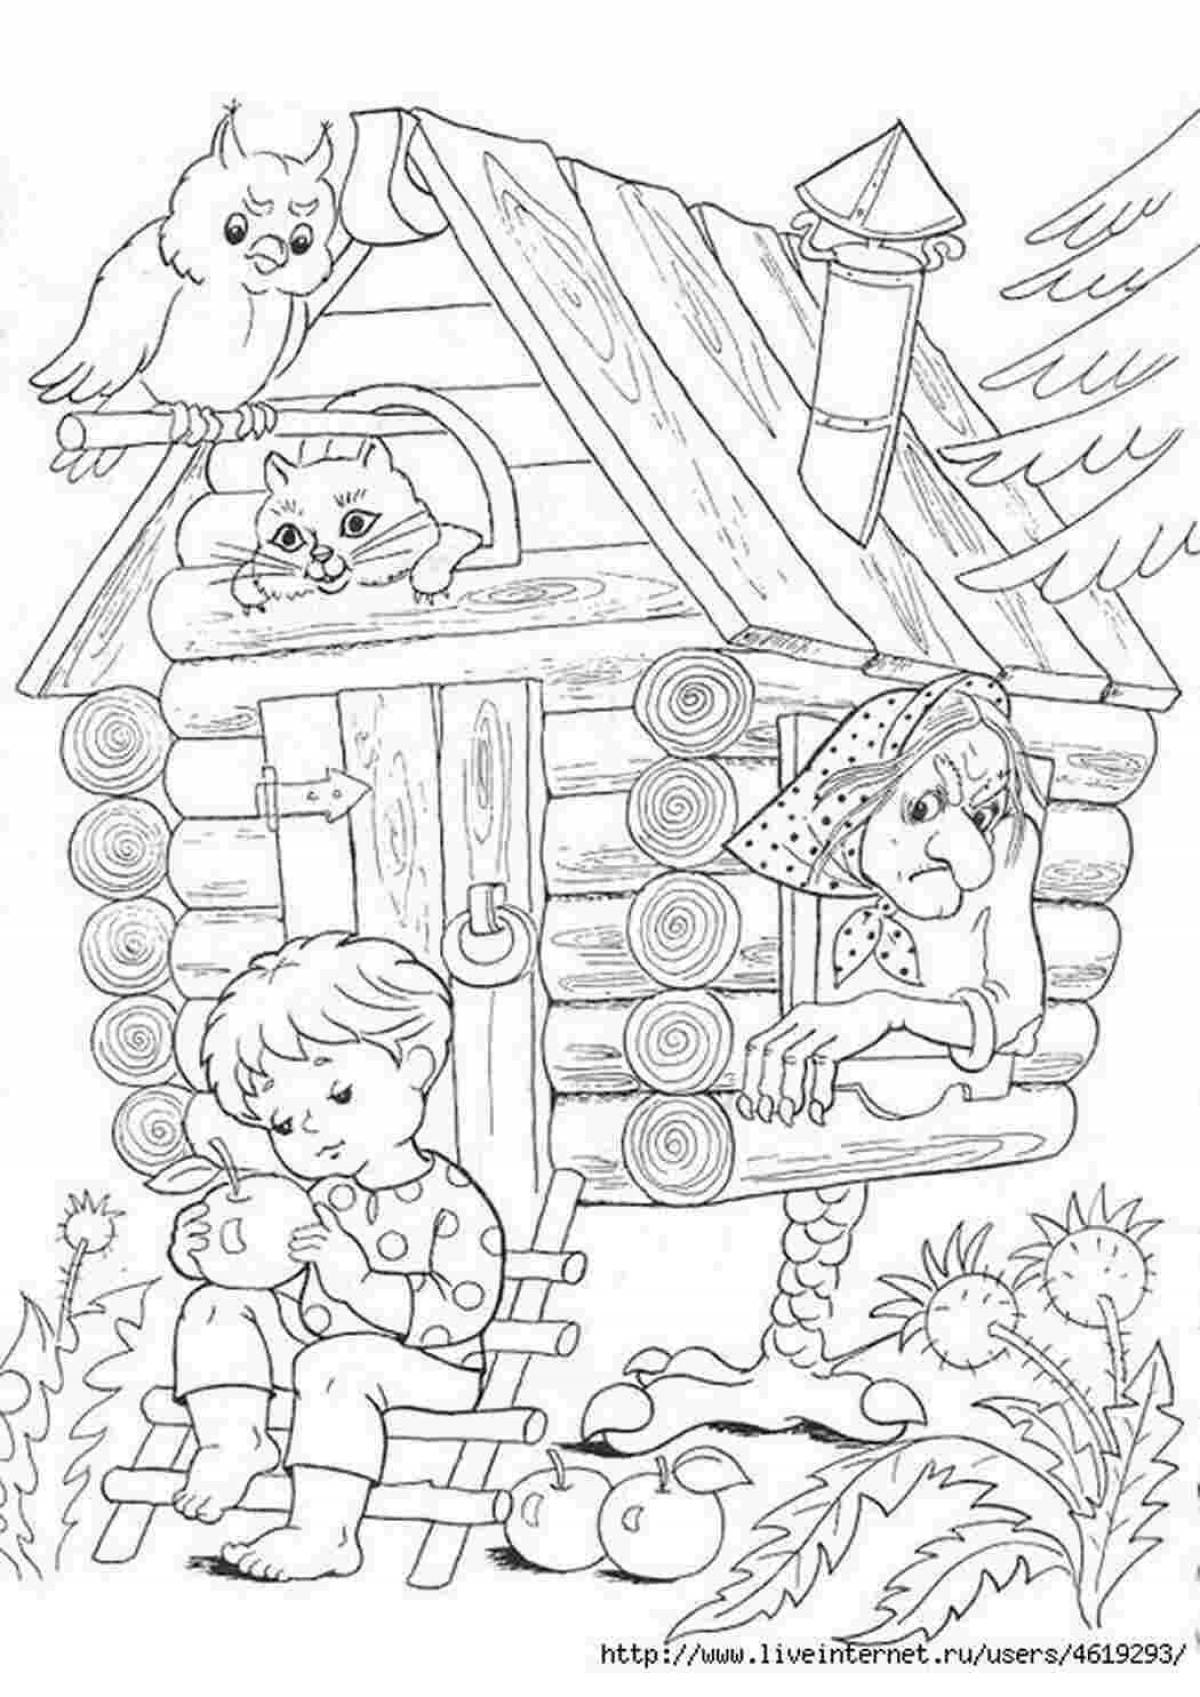 Coloring page unique baba yaga's house